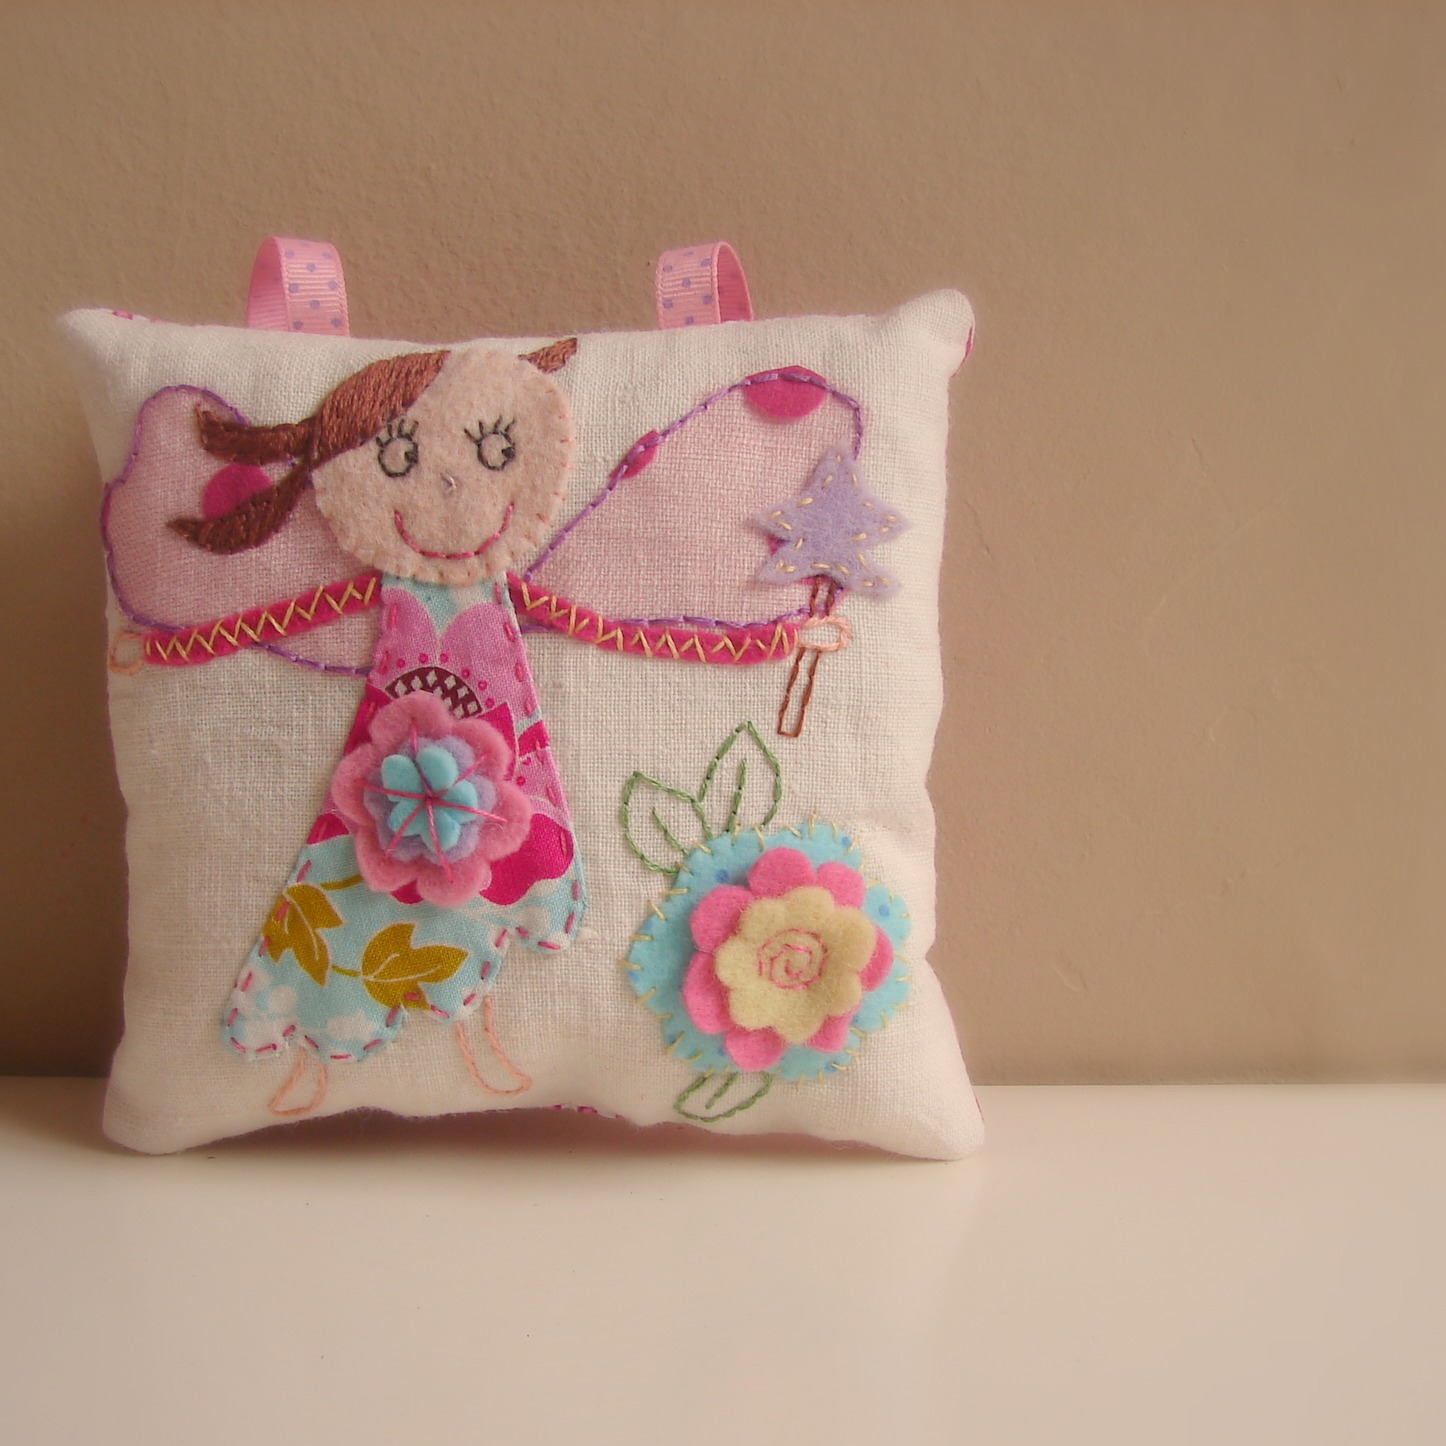 Roxy Creations Tooth fairy pillows